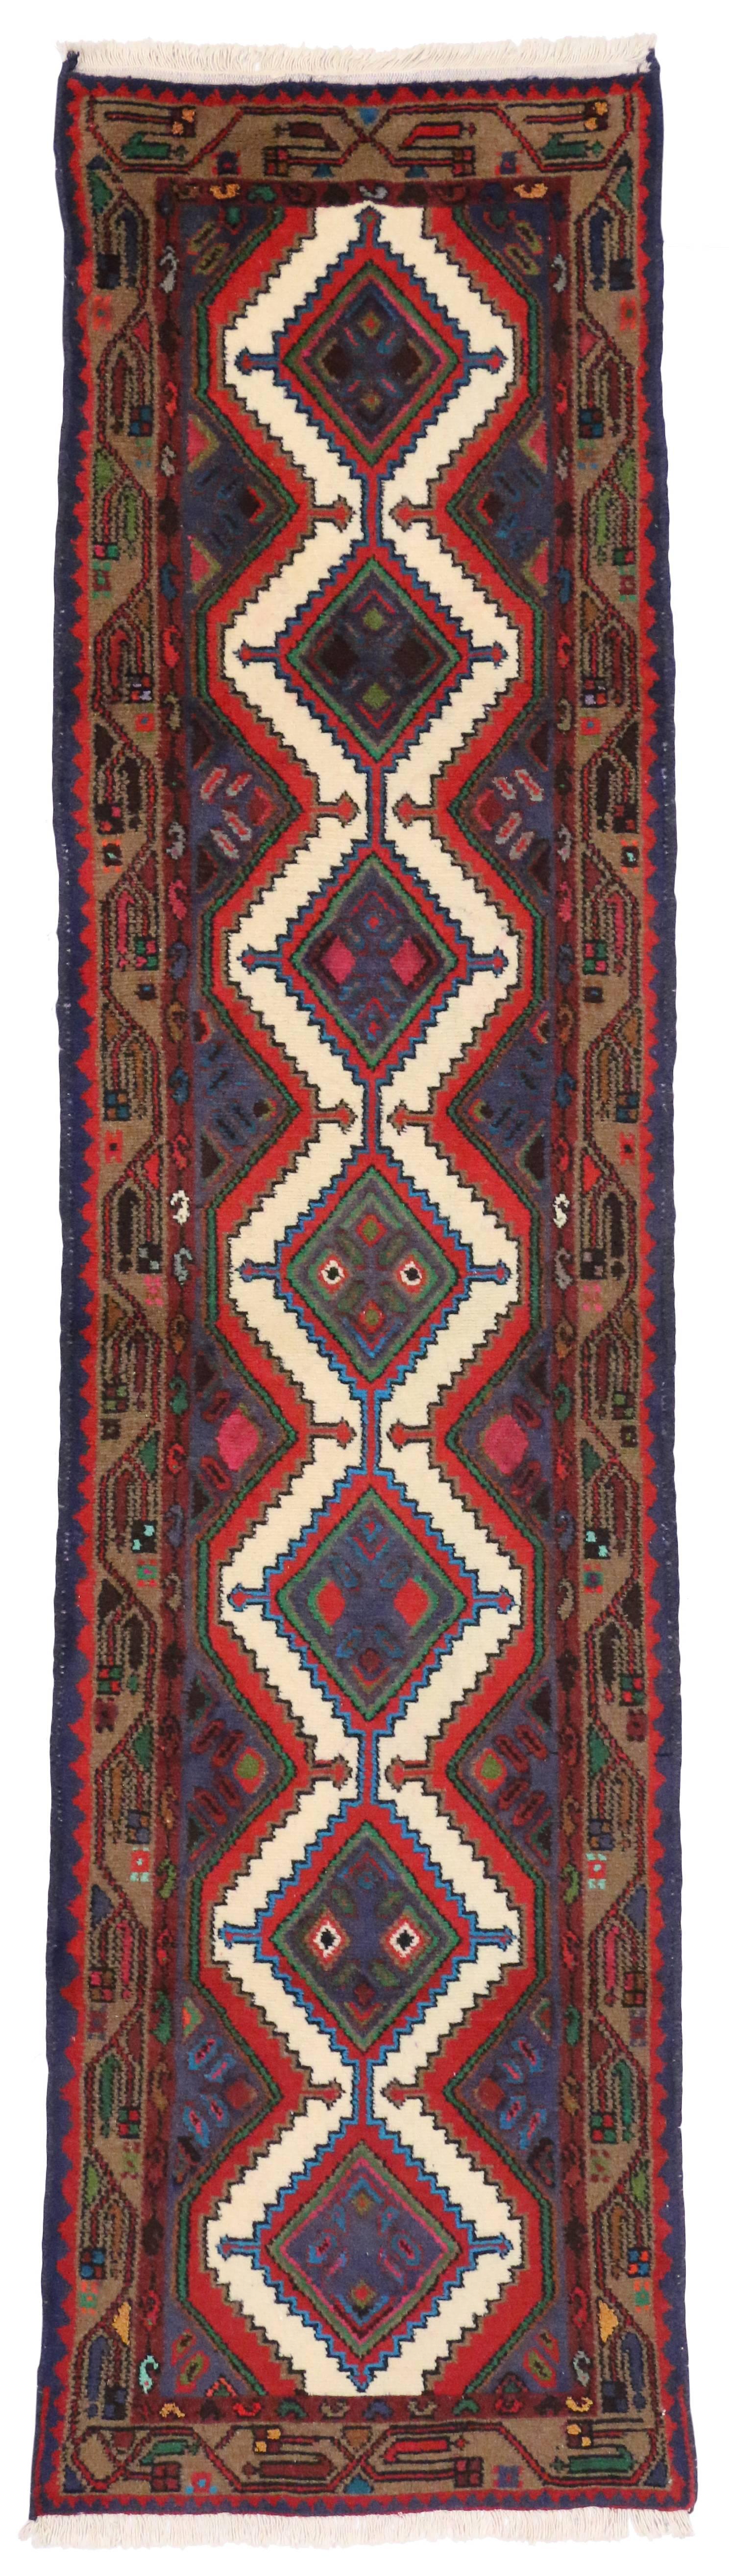 60224 Vintage Persian Hamadan Runner, Hallway Runner with Art Deco Style. Vintage hand-knotted wool Persian Hamadan runner featuring stacked medallions surrounded by geometric motifs and framed with a colorful tribal border. Rendered in traditional